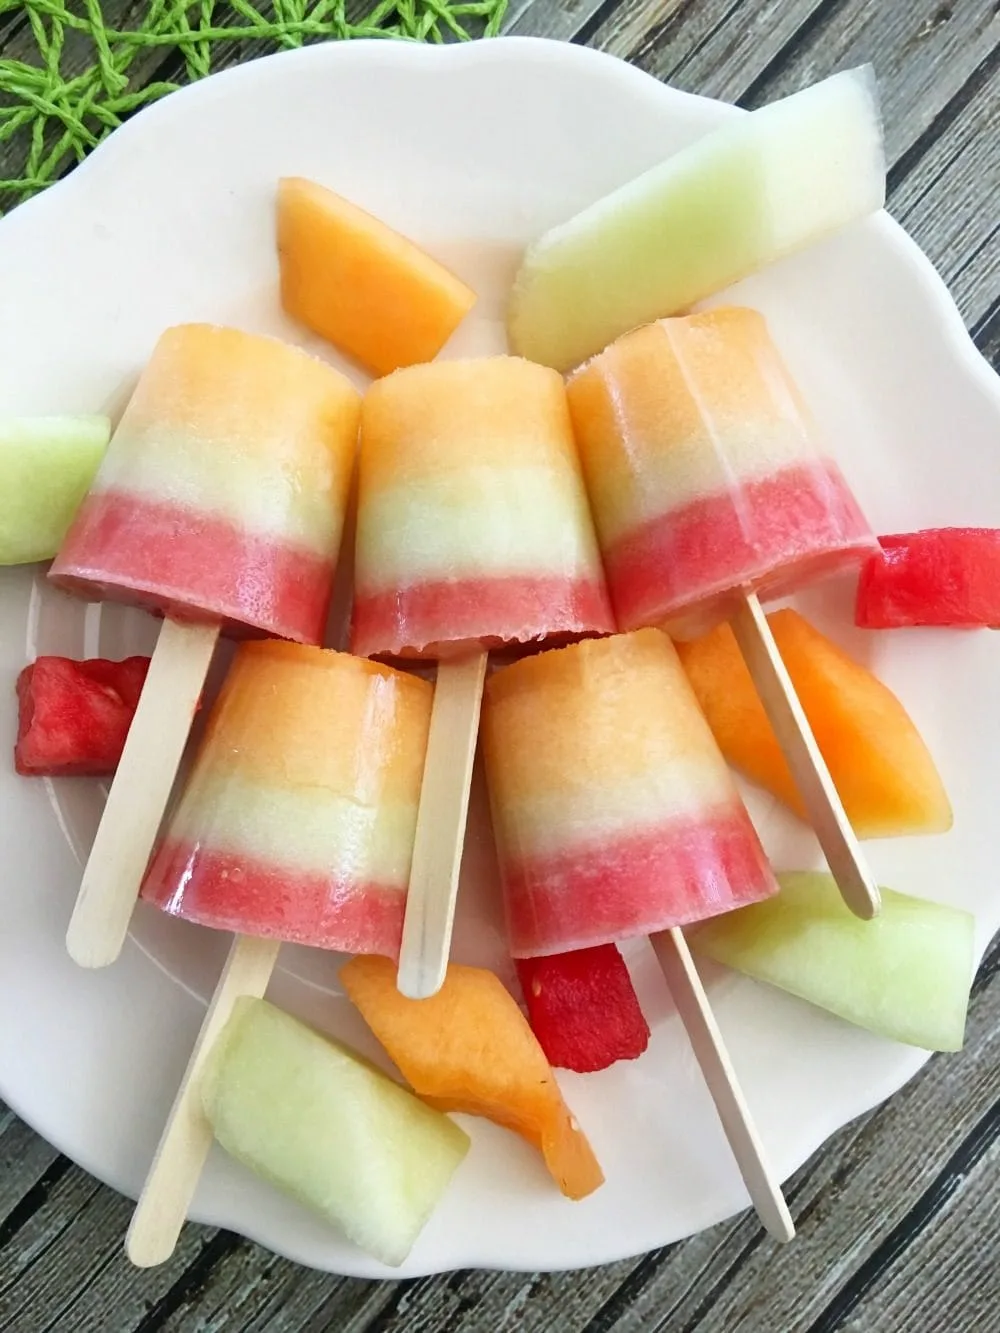 Layered melon popsicles on a plate.